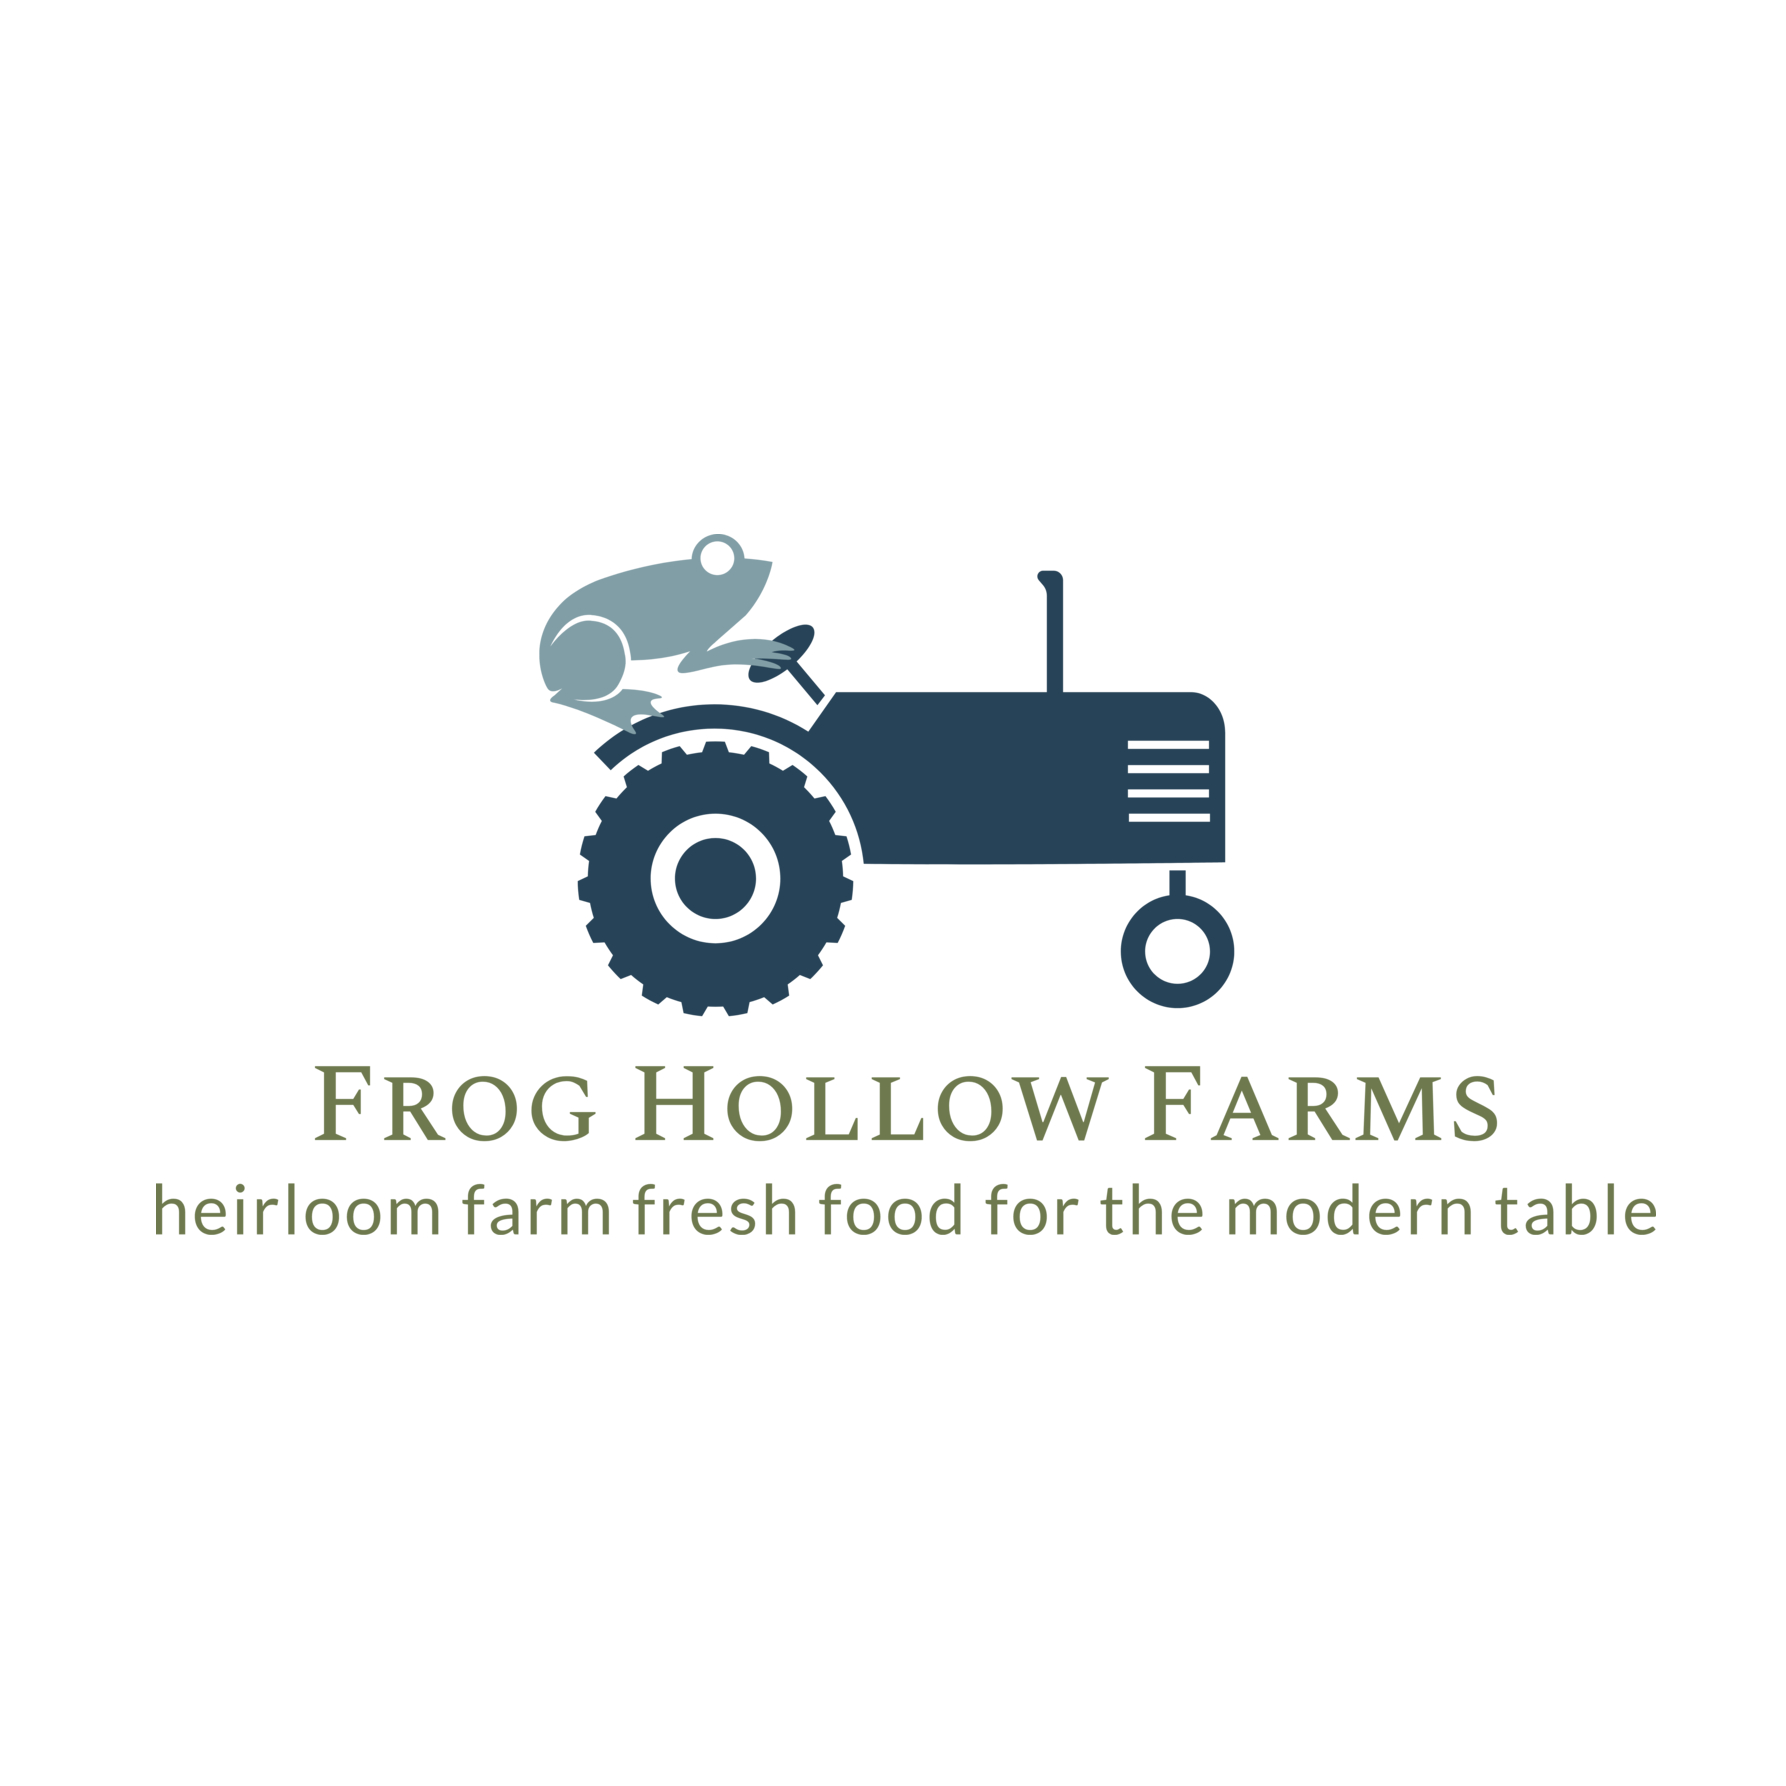 Frog Hollow Farms